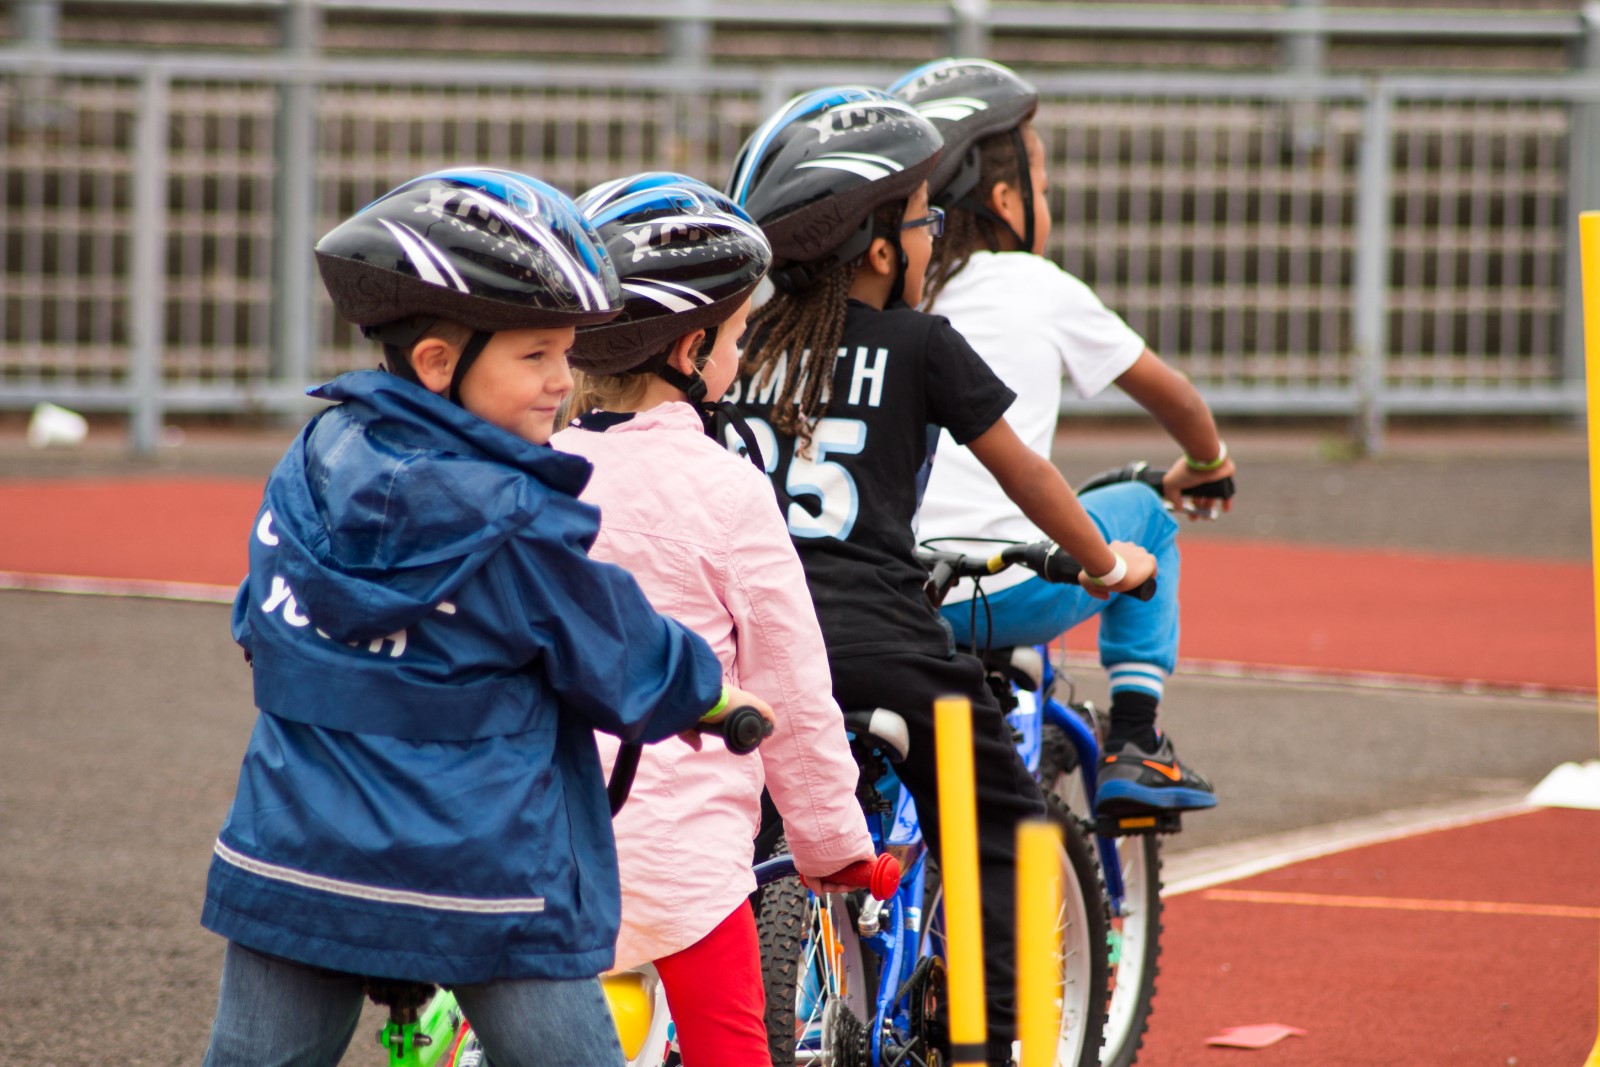 Line of children on bicycles.jpg